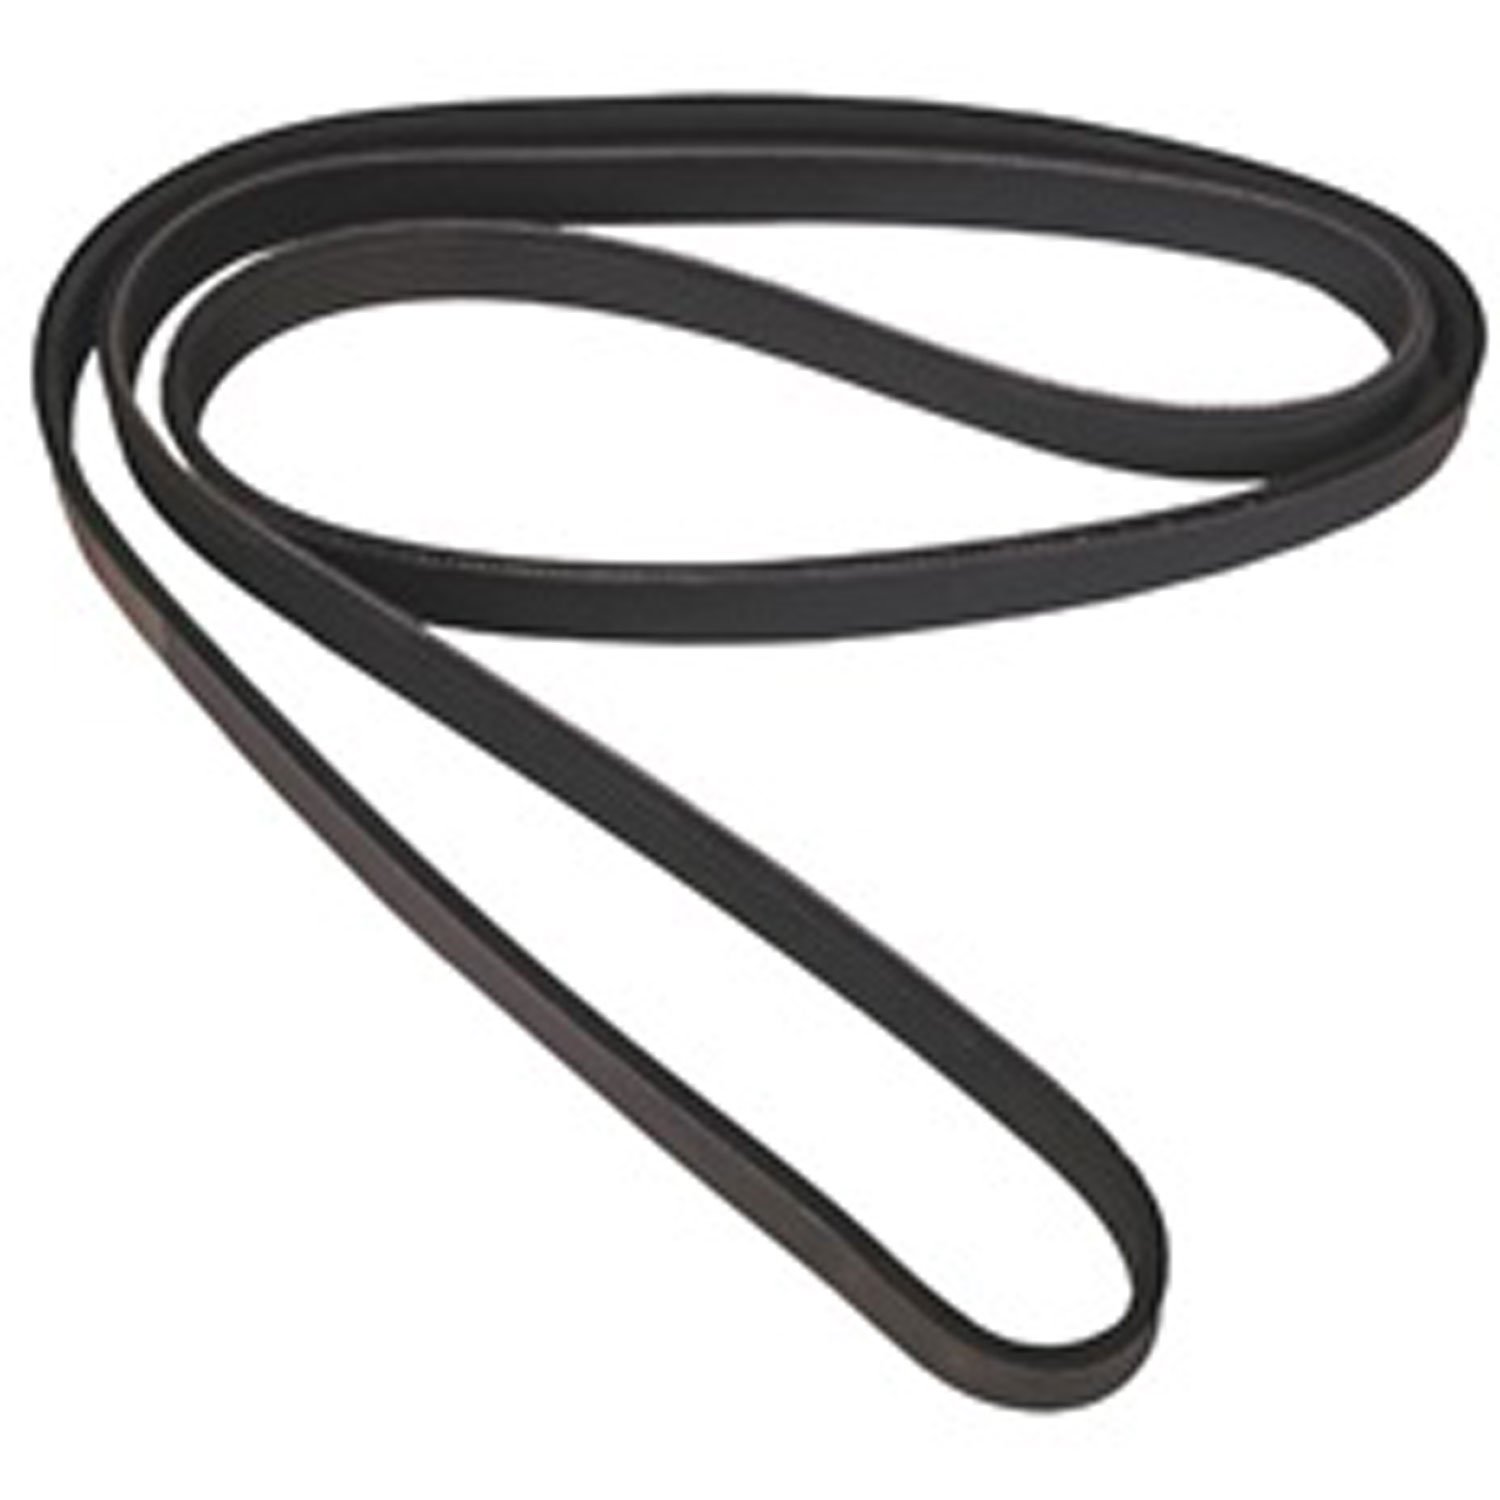 Stock replacement serpentine belt from Omix-ADA, Fits 97-02 Jeep Wrangler TJ with 2.5 liter engine and air conditioning.